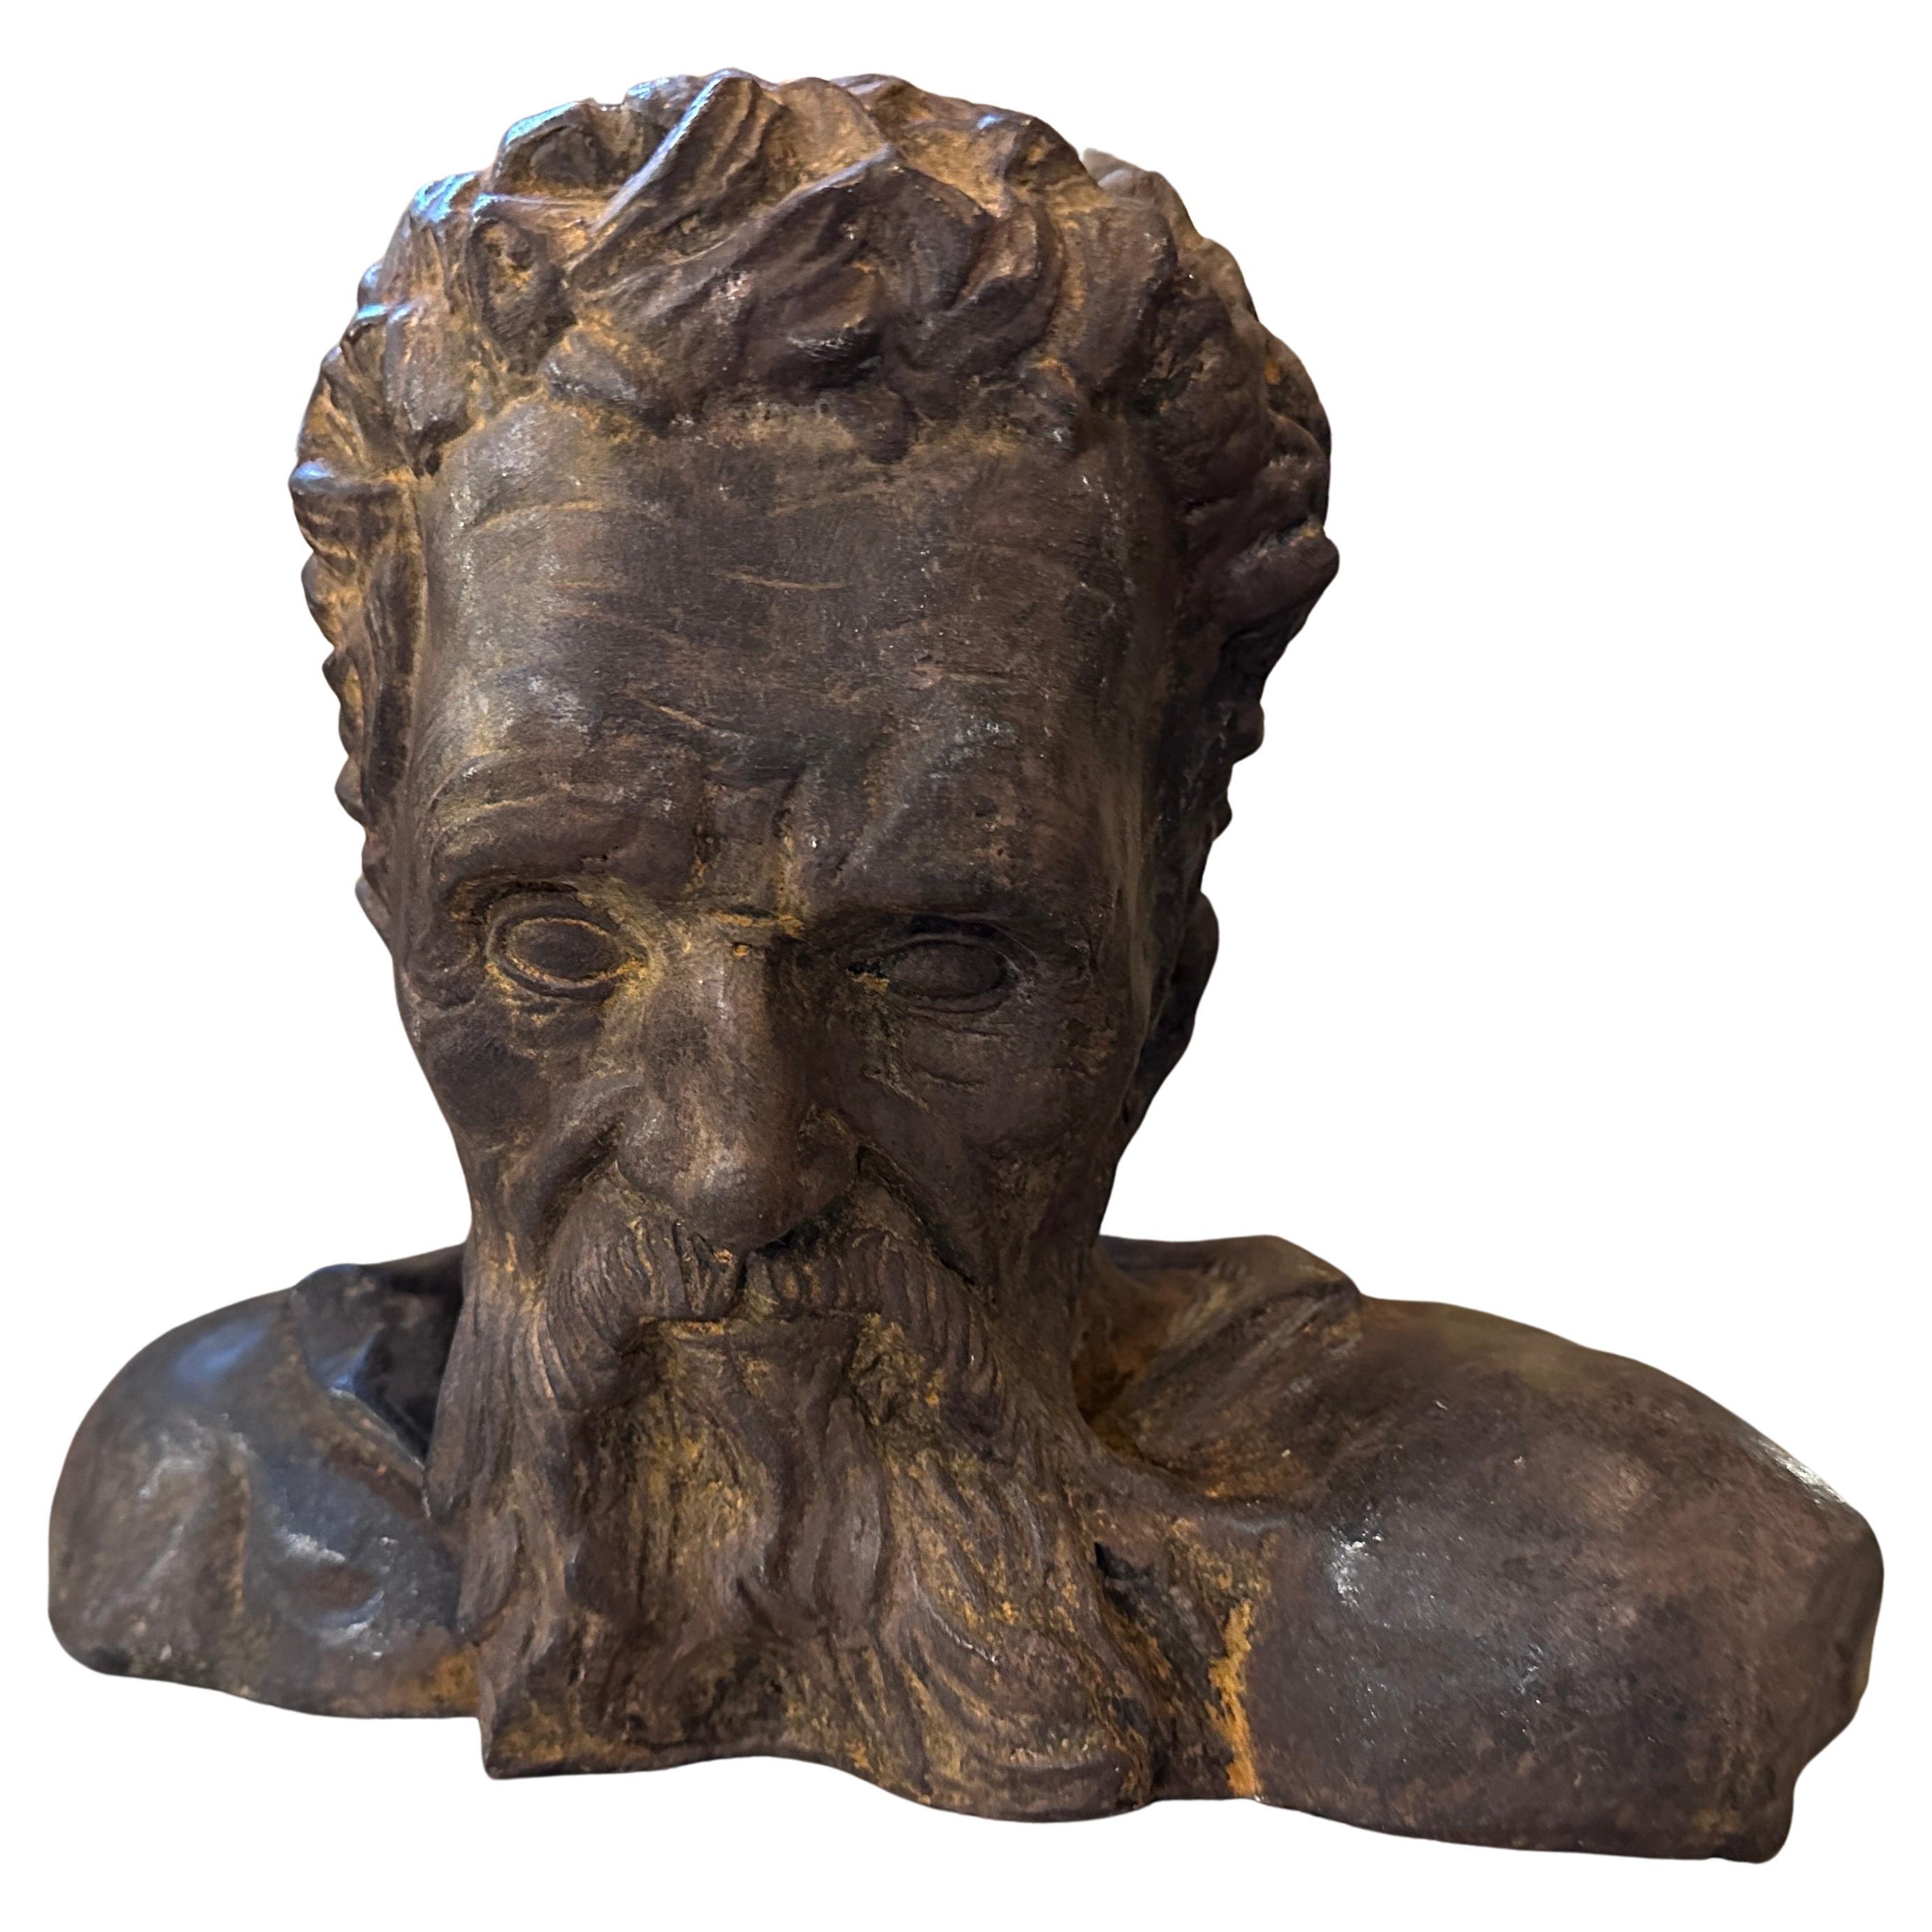 An Hand-crafted Terracotta Sculpture of an Old Man Bust in original patina with signs of use and age hand-cratfted in Sicily in the first half of 20th century.
This terracotta of an old man bust, is a remarkable piece of art with historical and